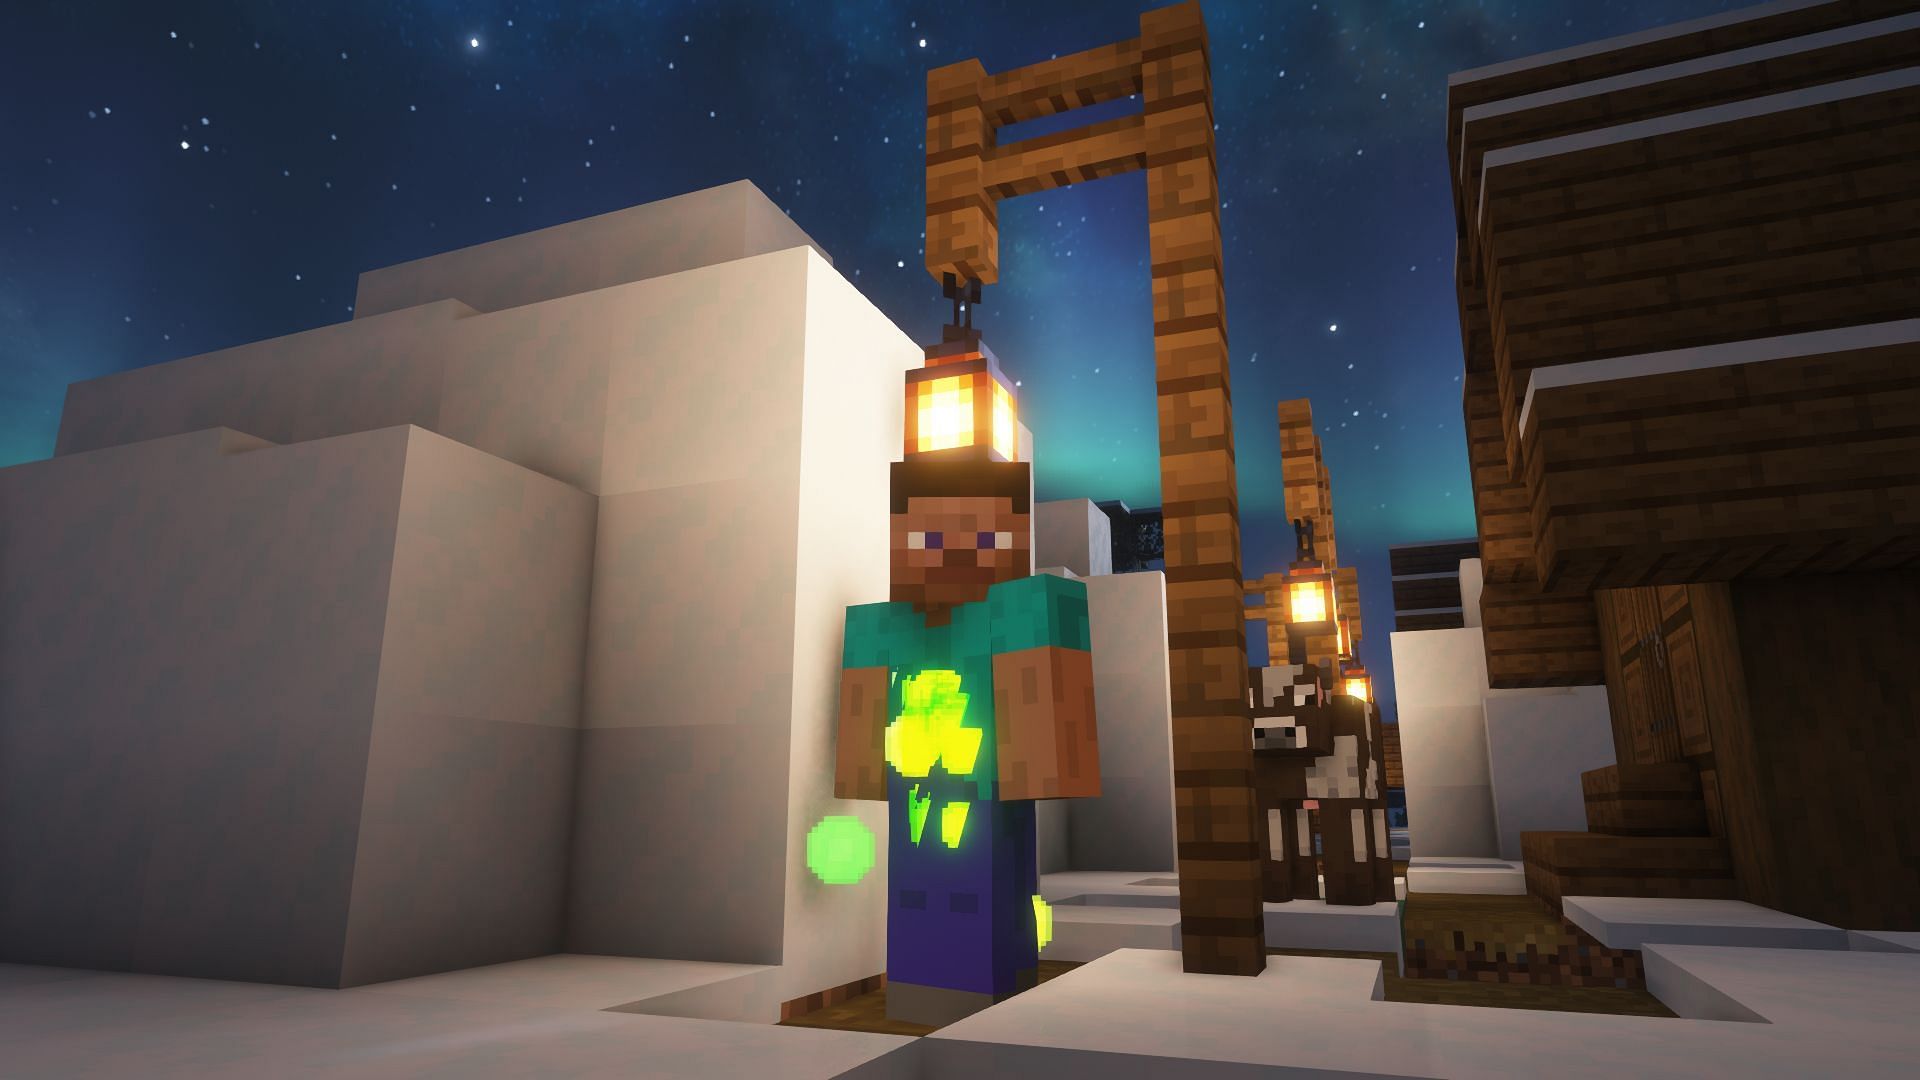 Steve collecting XP orbs in the game (Image via Minecraft)